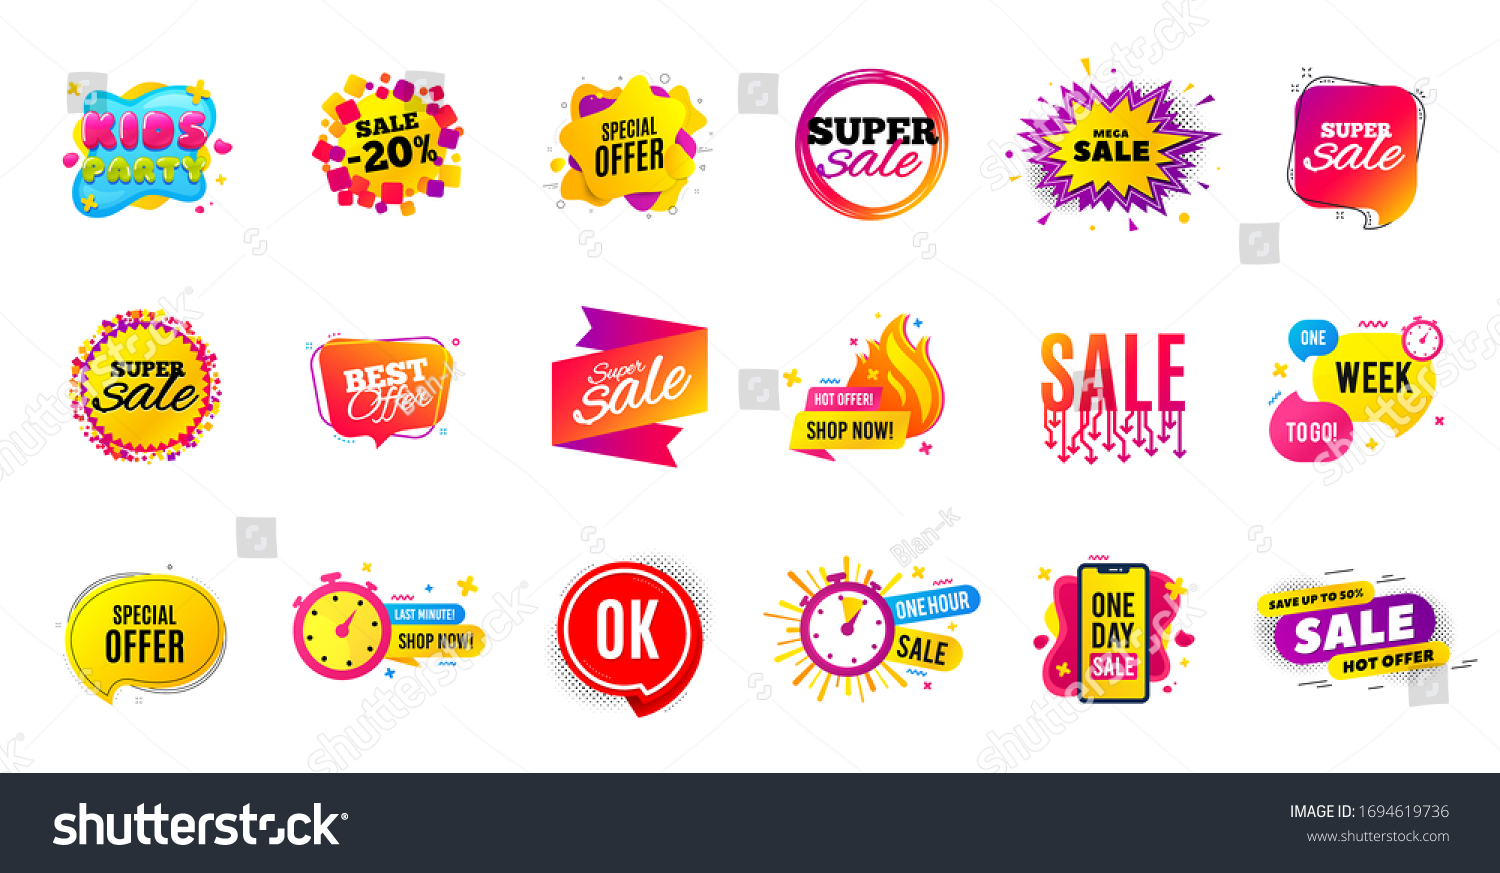 Sale offer banner. Discounts price tags. Coupon promotion templates. Black friday shopping icons. Cyber monday sale banner. Best offer badge. Price discounts icons. Deal templates. Vector #1694619736